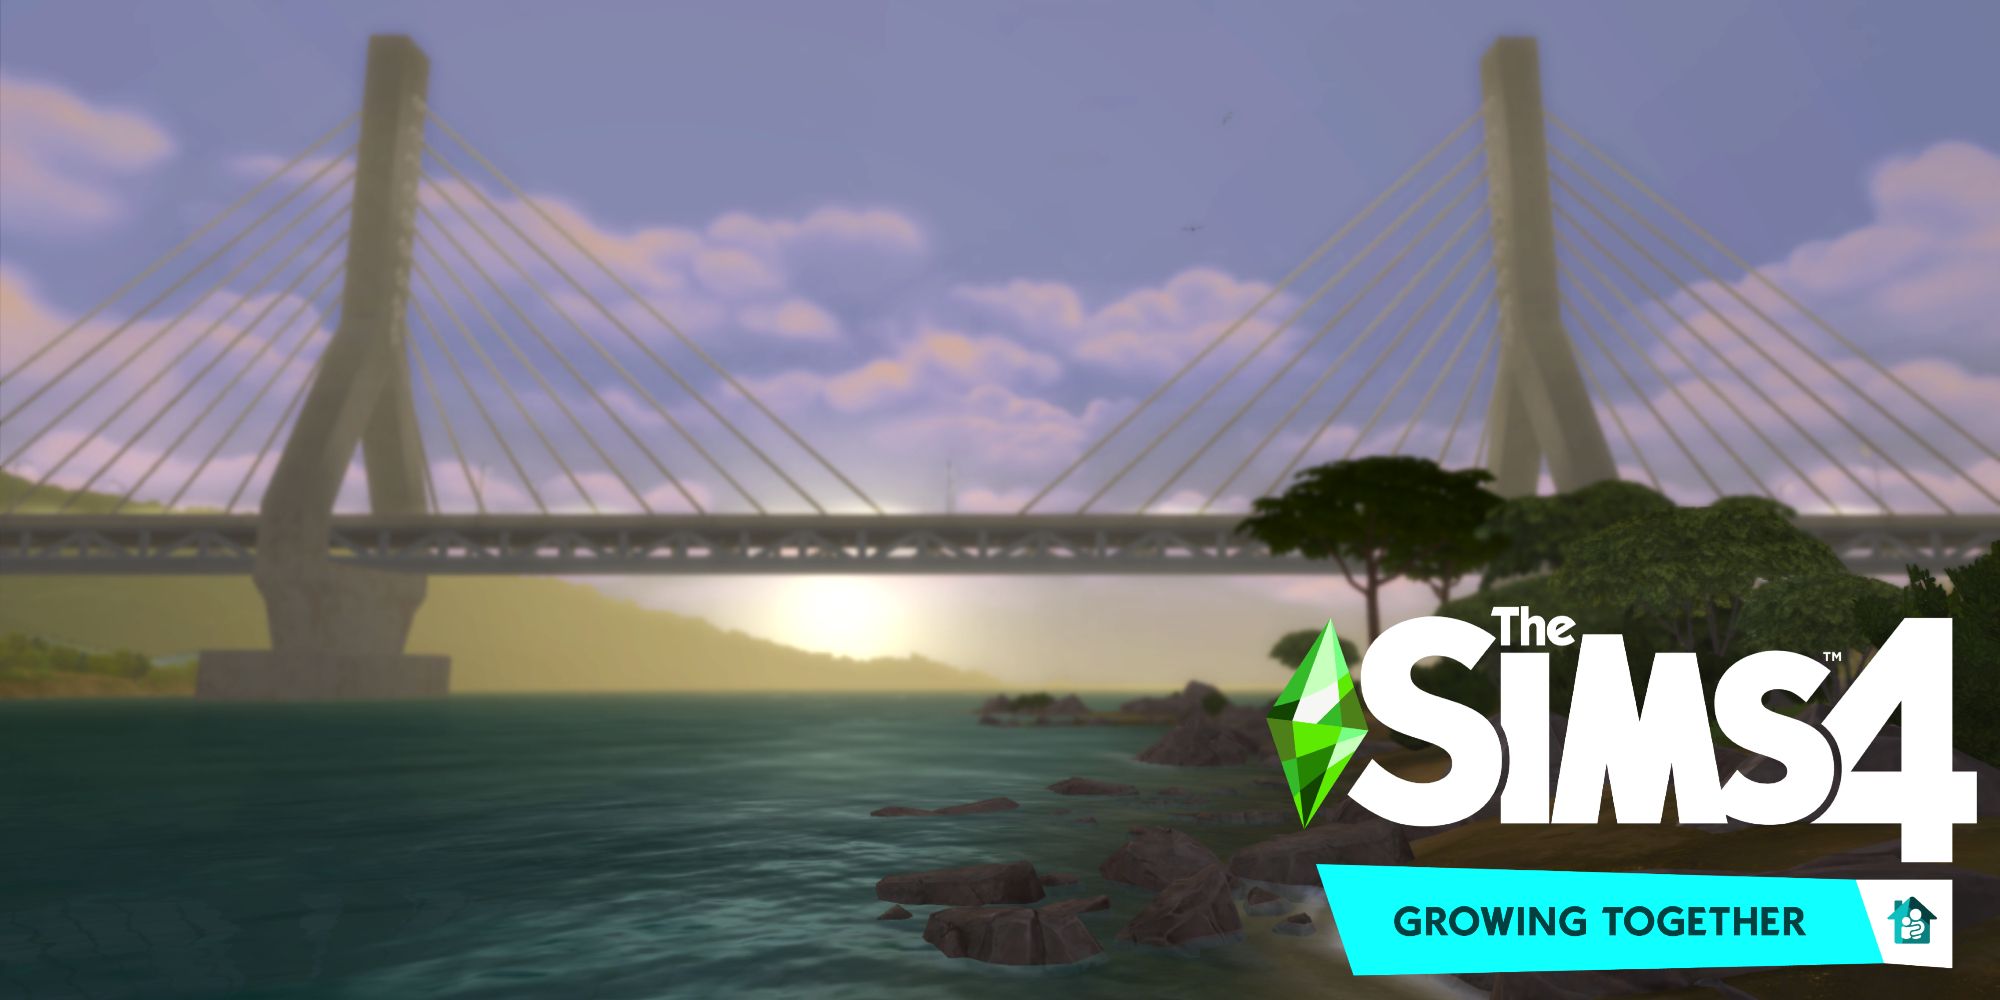 A photo of the sunset San Sequoia bridge. This world from Growing Together is one of the hottest in the game.